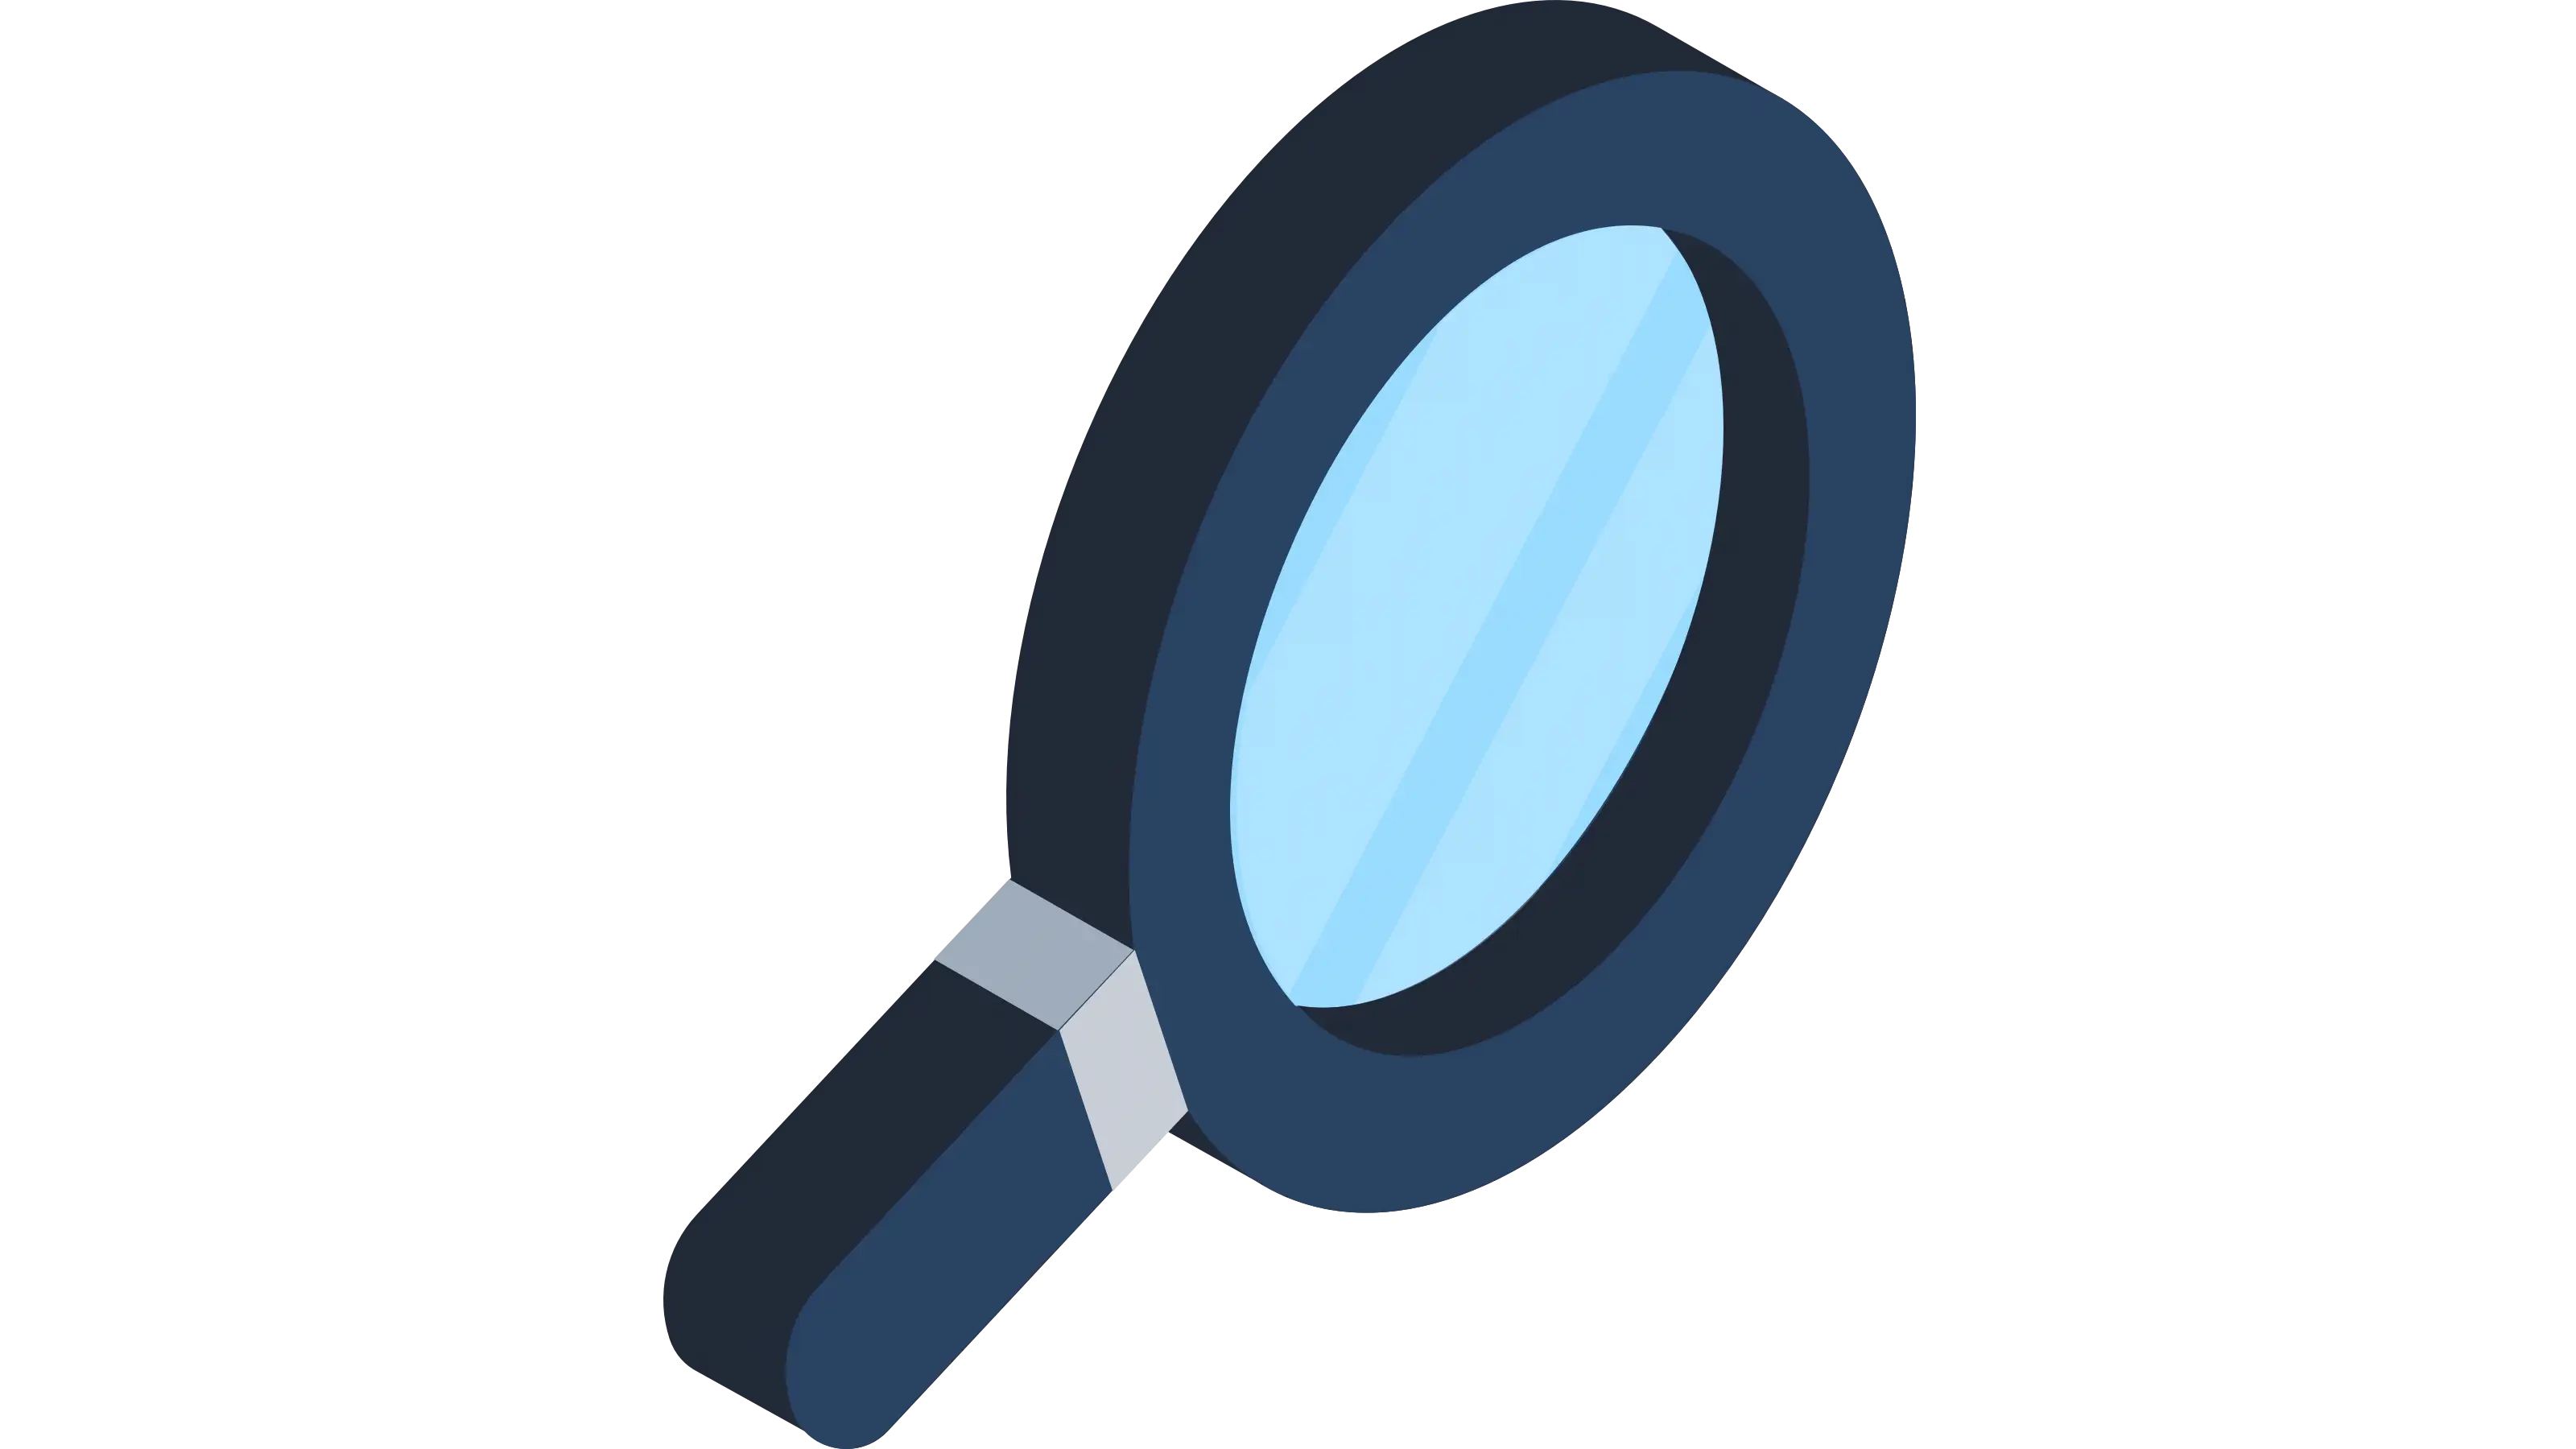 a magnifying glass icon with a dark blue metal design and blue transparent glass